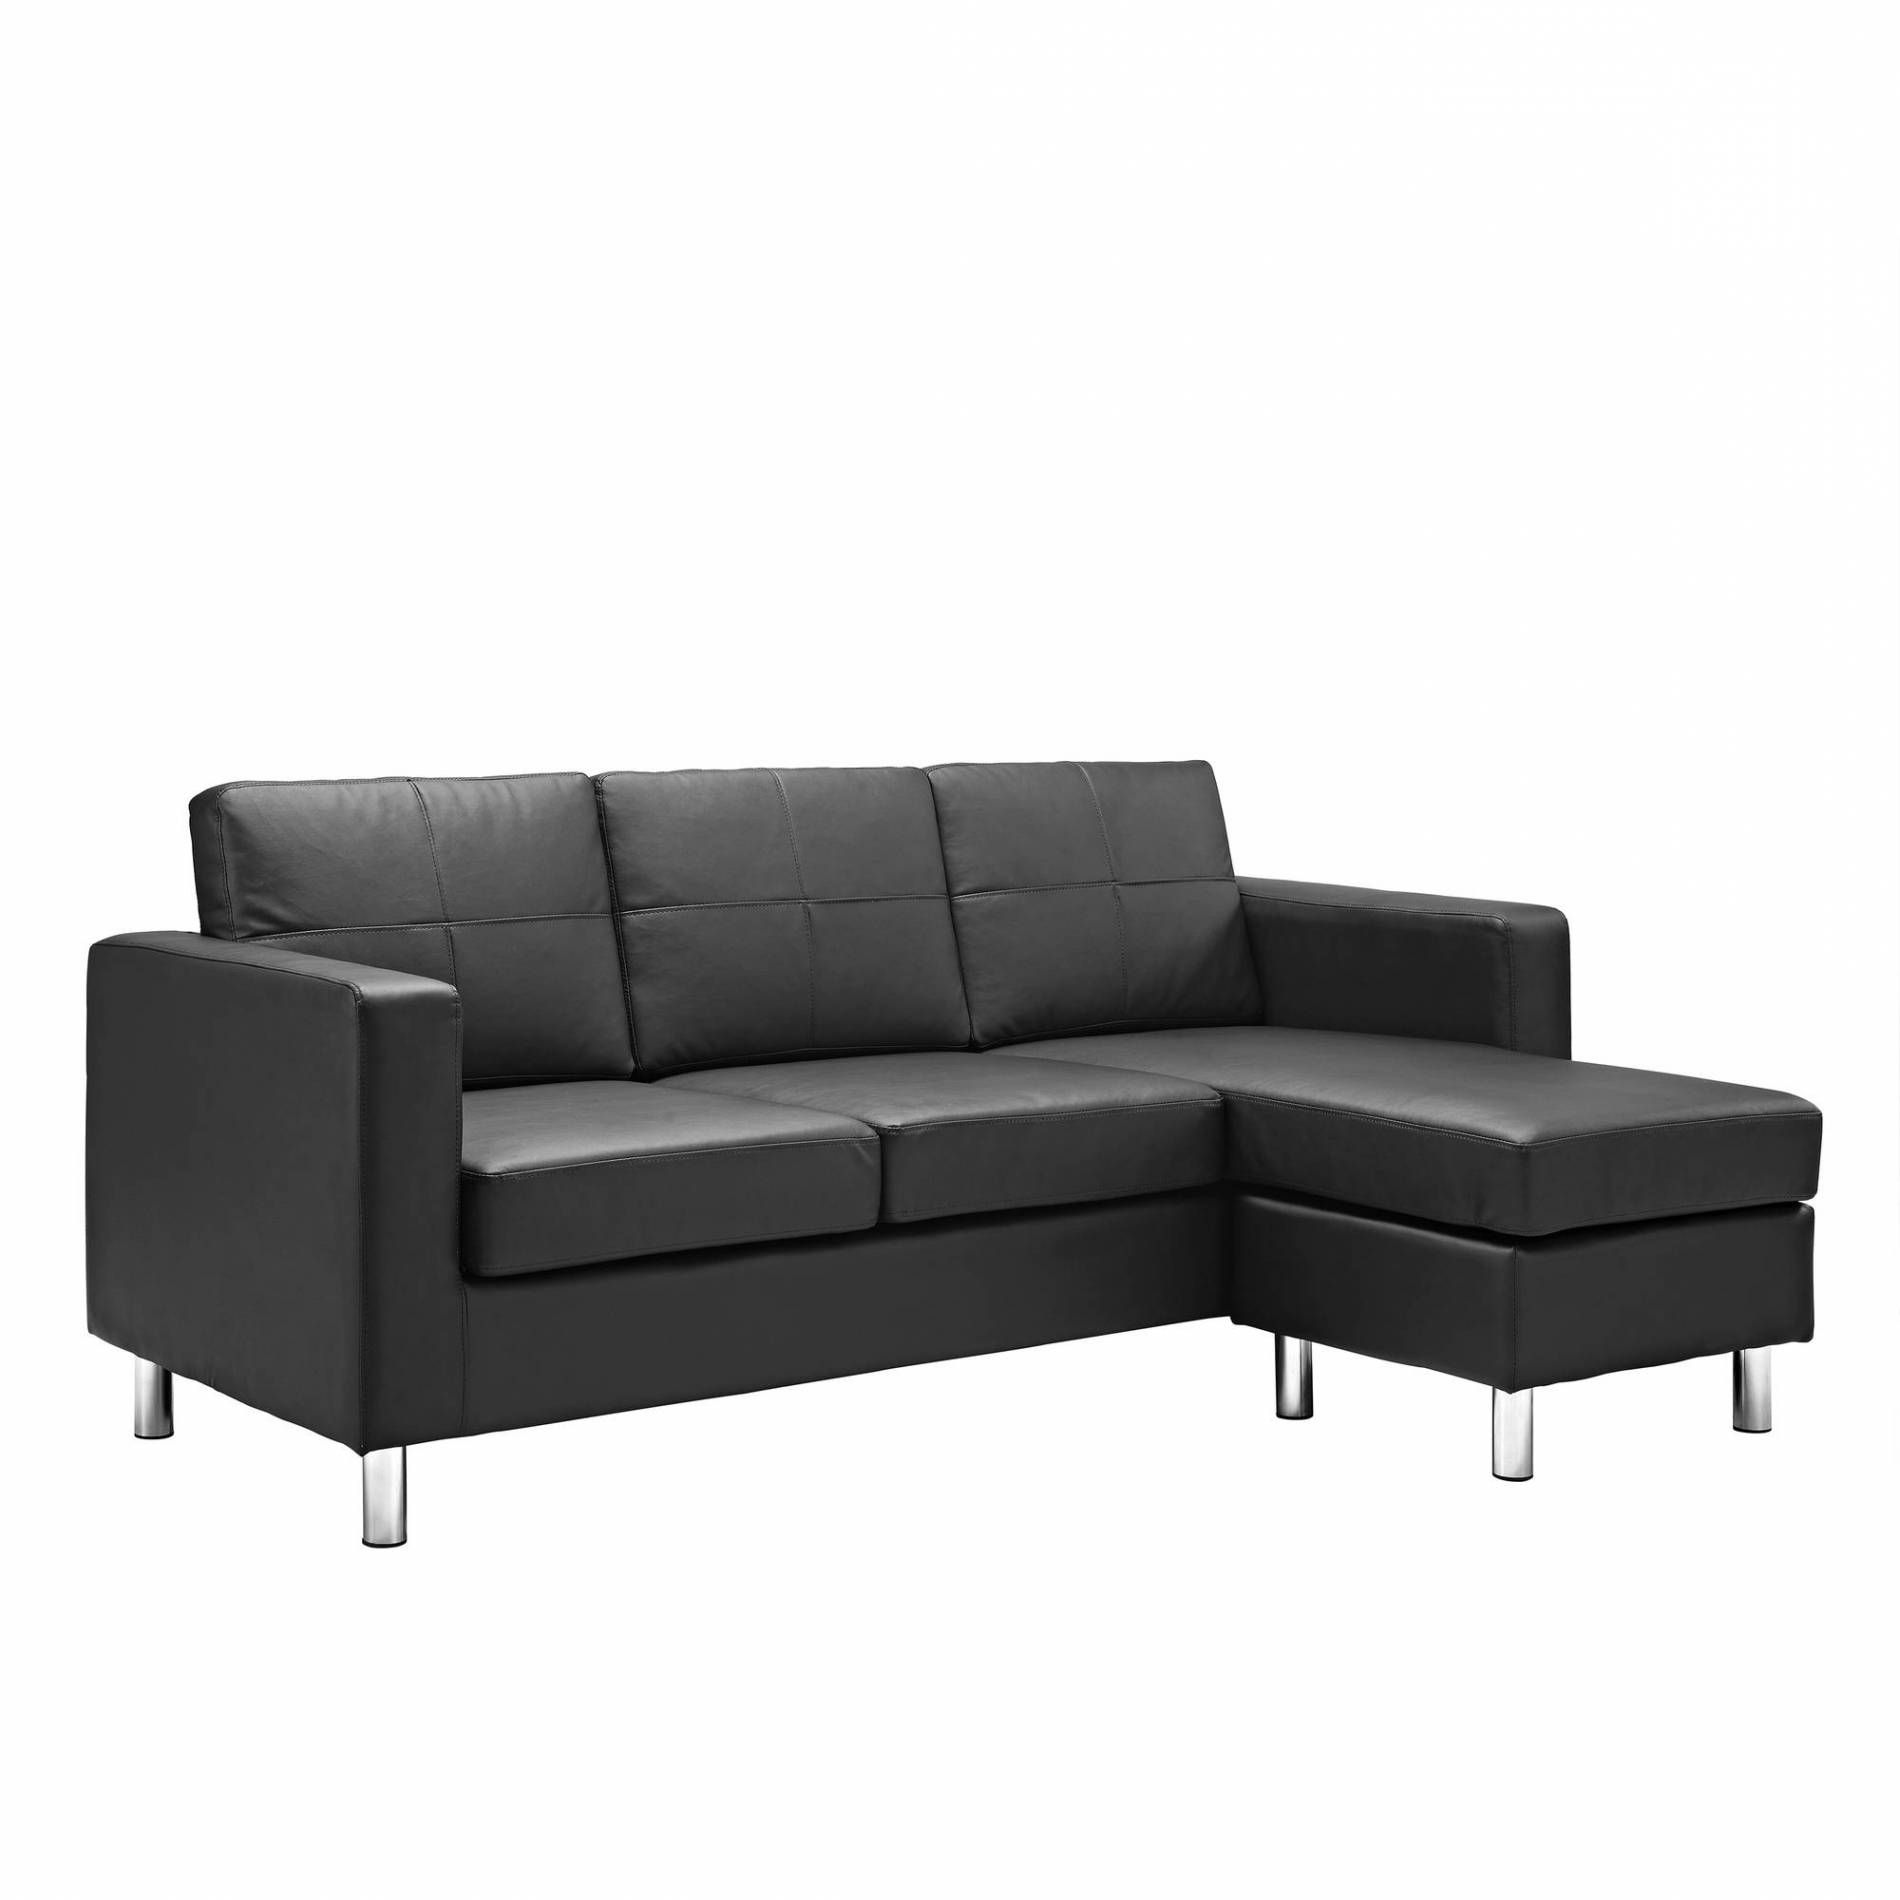 Small Sectional Sofa: Amazing Furniture For Narrow Living Room For Narrow Sectional Sofas (View 15 of 15)